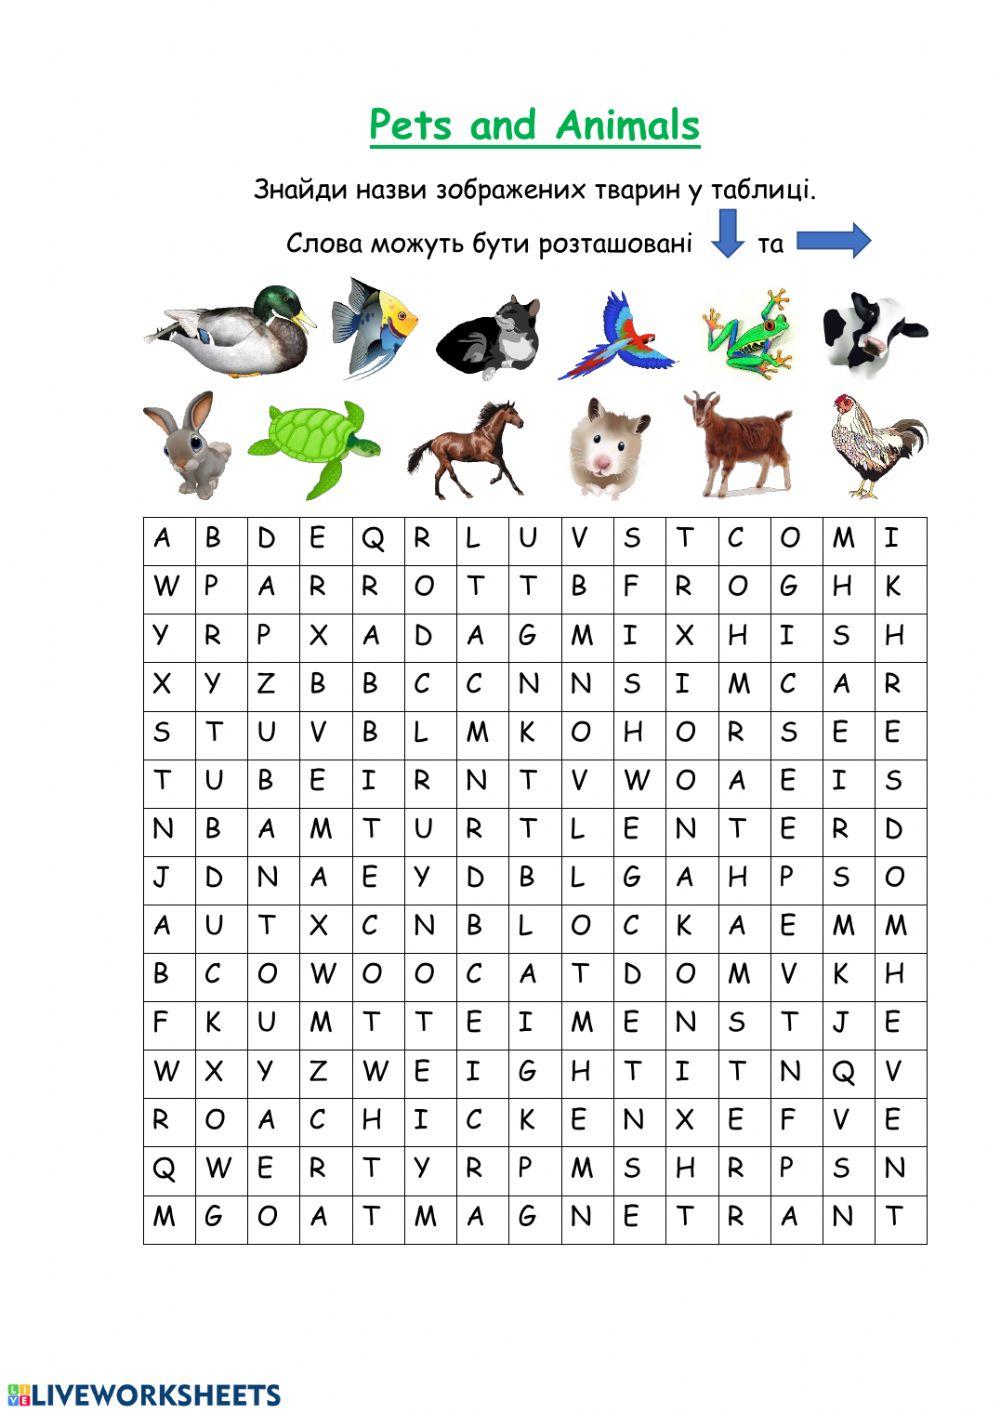 Pets and animals wordsearch